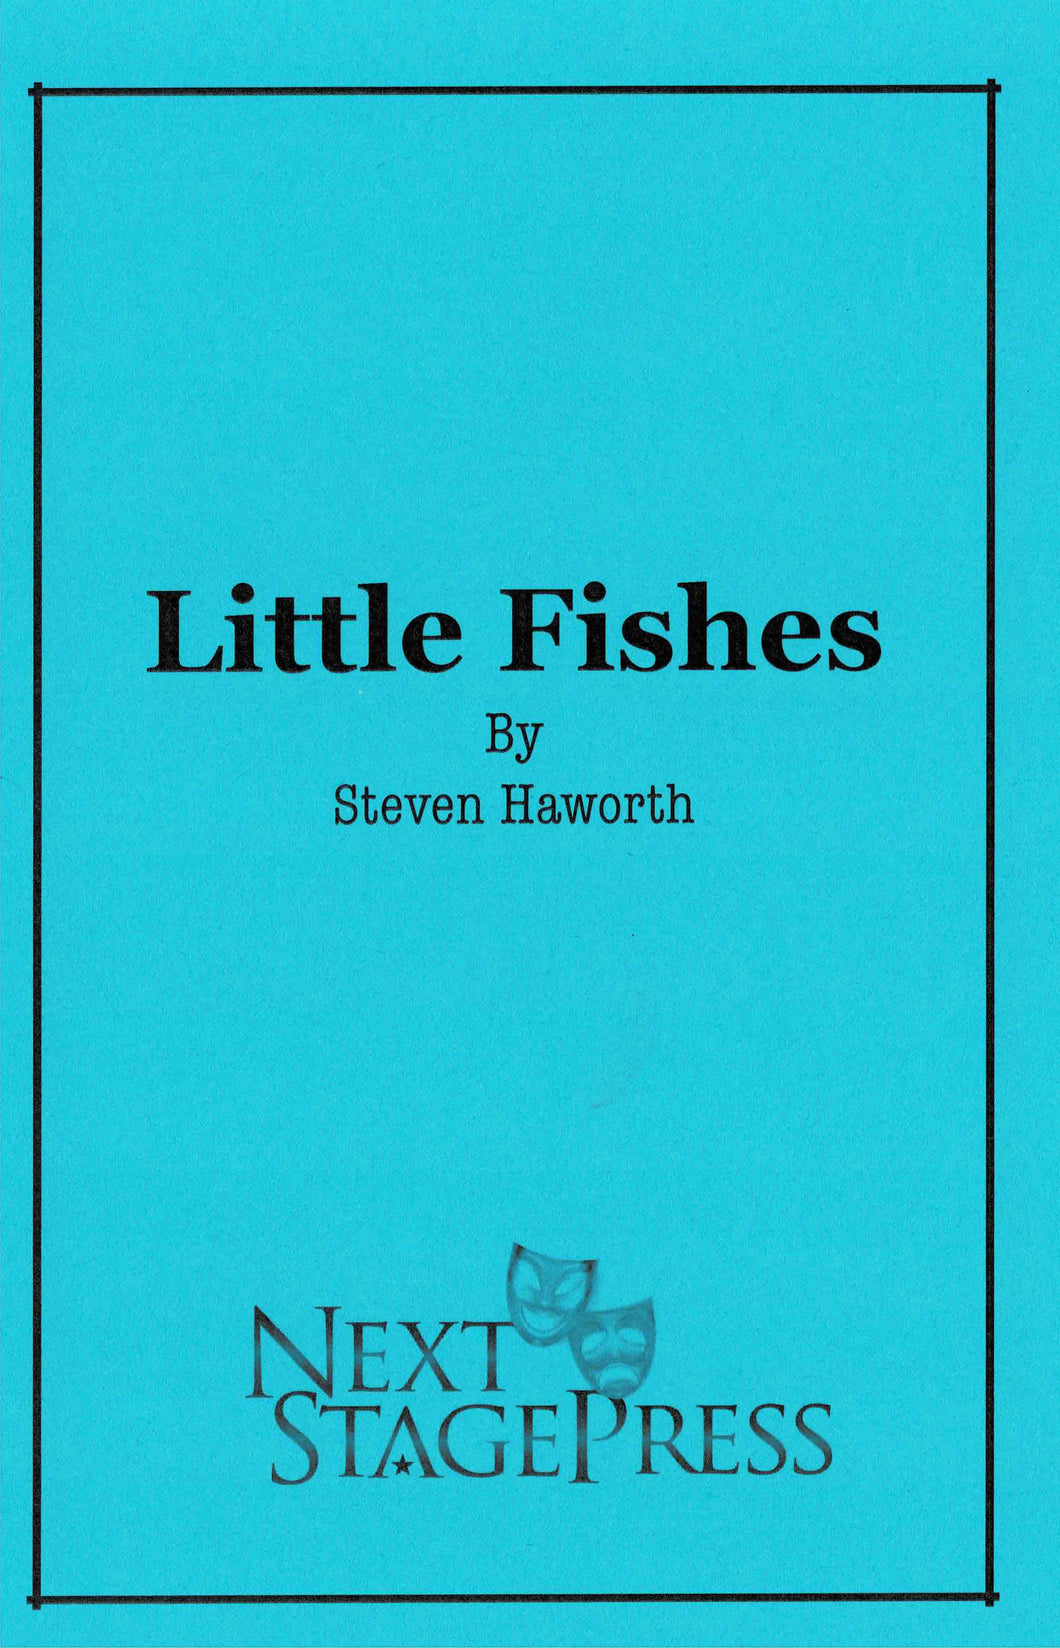 Little Fishes by Steven Haworth - Digital Version